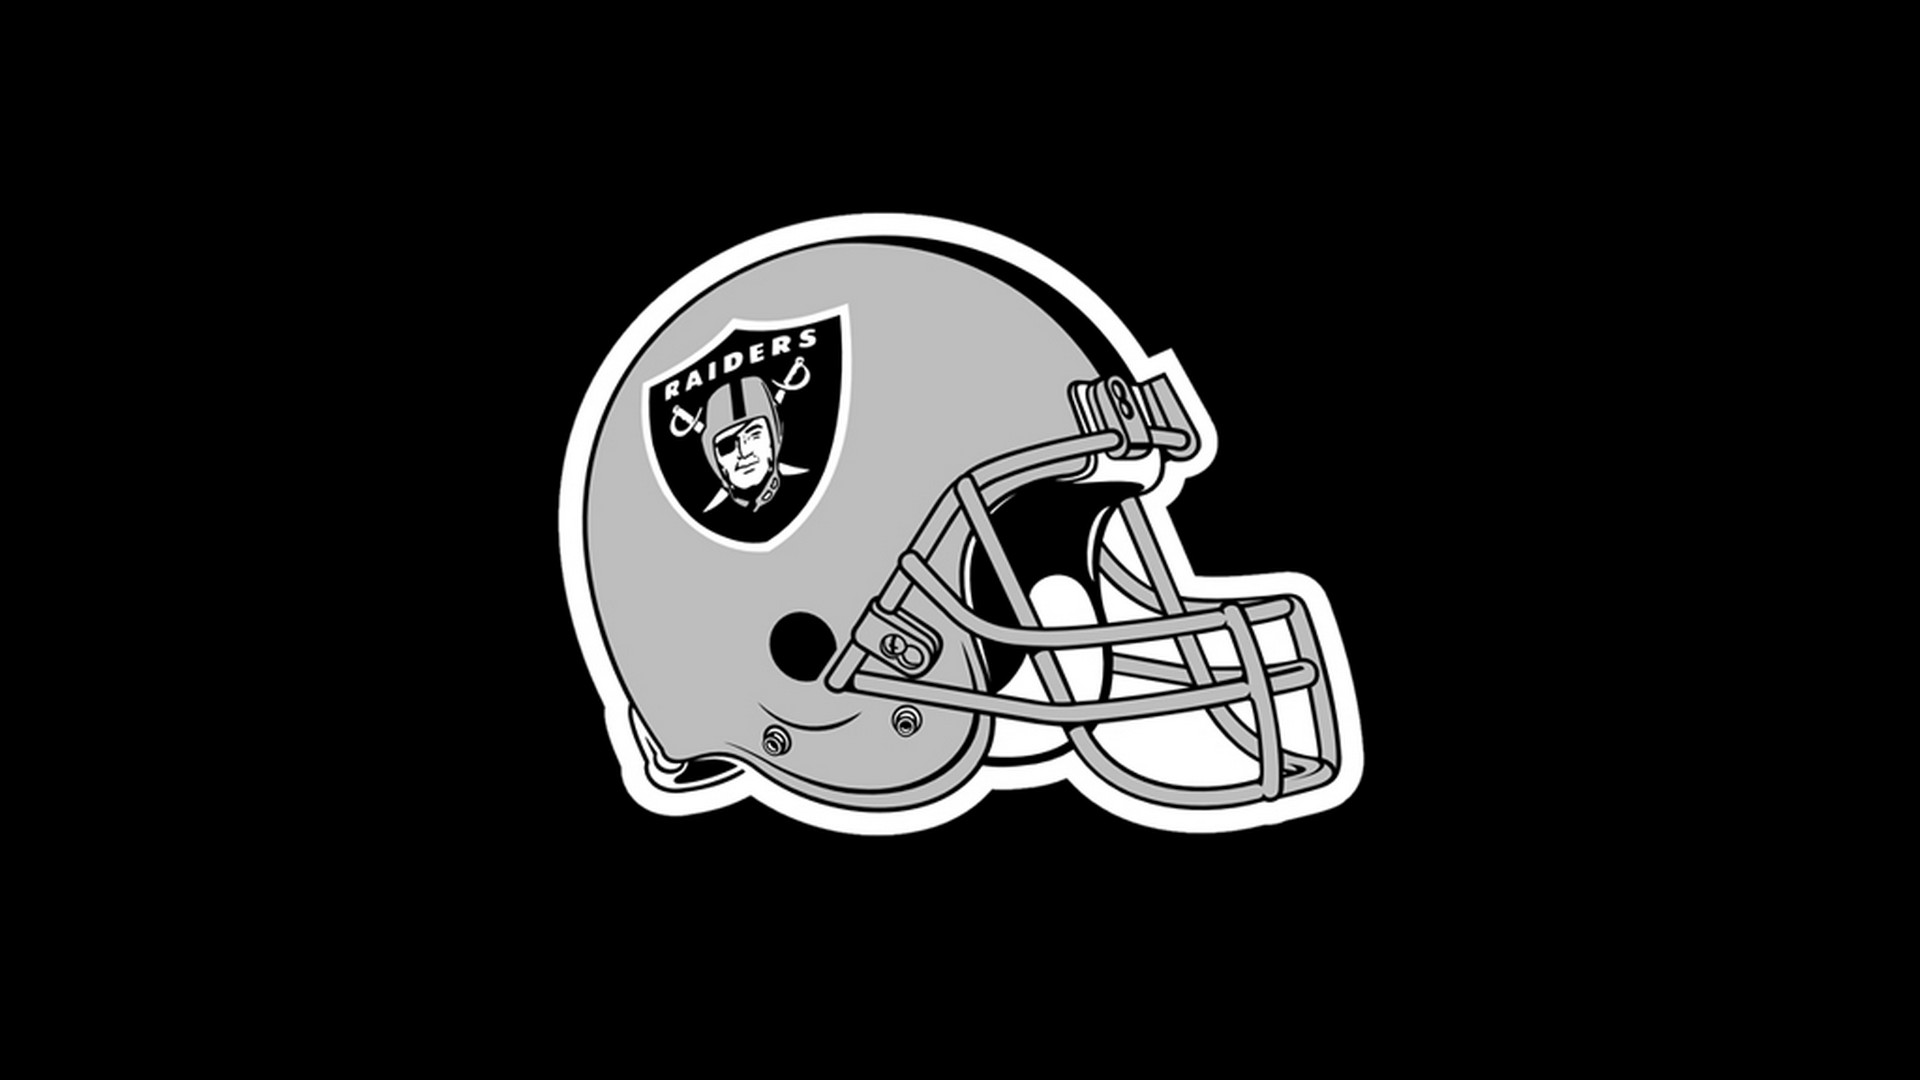 Oakland Raiders NFL HD Wallpapers With high-resolution 1920X1080 pixel. You can use this wallpaper for your Mac or Windows Desktop Background, iPhone, Android or Tablet and another Smartphone device